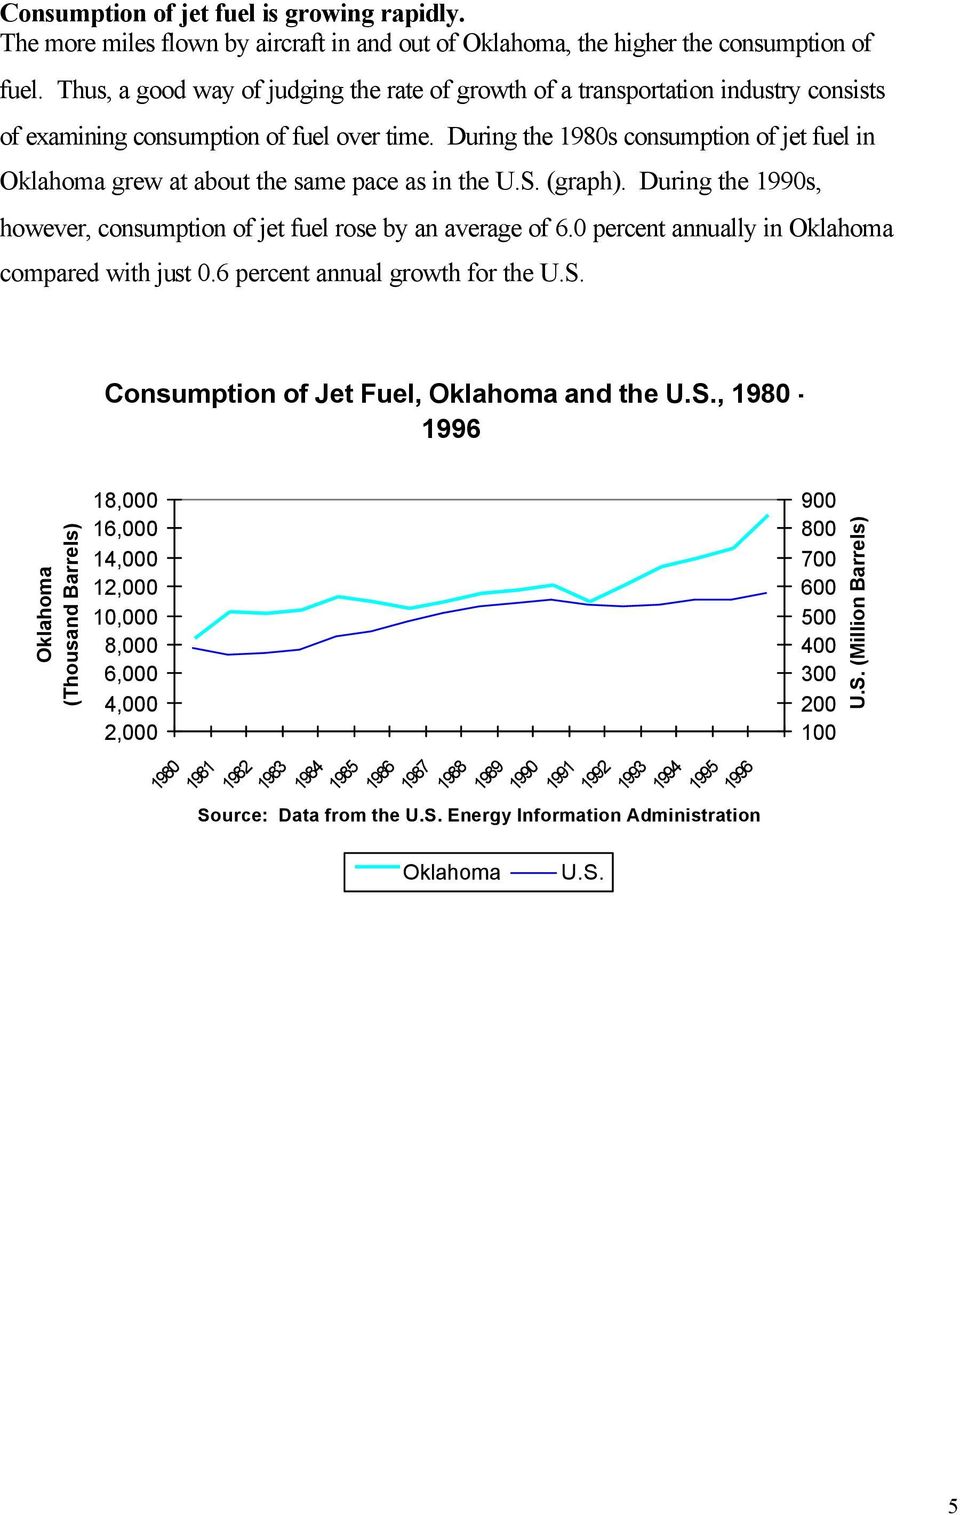 During the 1980s consumption of jet fuel in Oklahoma grew at about the same pace as in the U.S. (graph). During the 1990s, however, consumption of jet fuel rose by an average of 6.